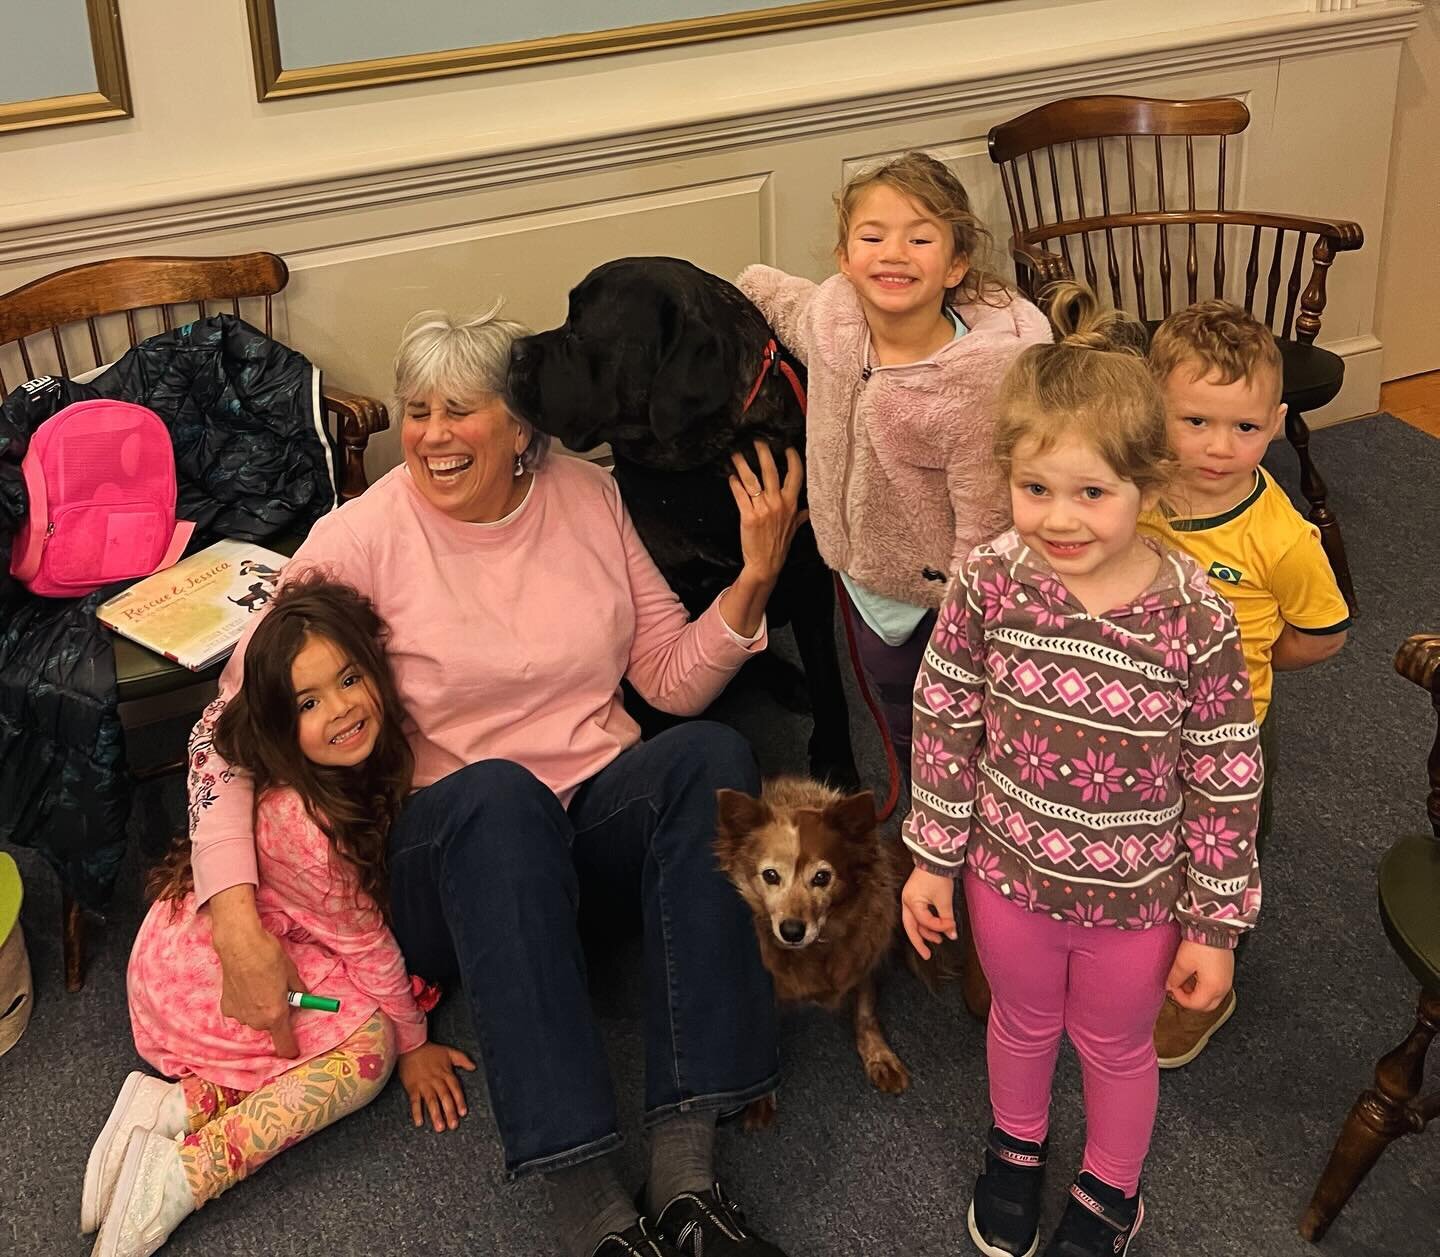 Keeper and Max had a wonderful visit during story time today at the Randall library visiting with the kids as they read stories about therapy dogs! The children loved the dogs and Keeper showed off her tricks : ) And Kris loved her kiss from Max 😘 #